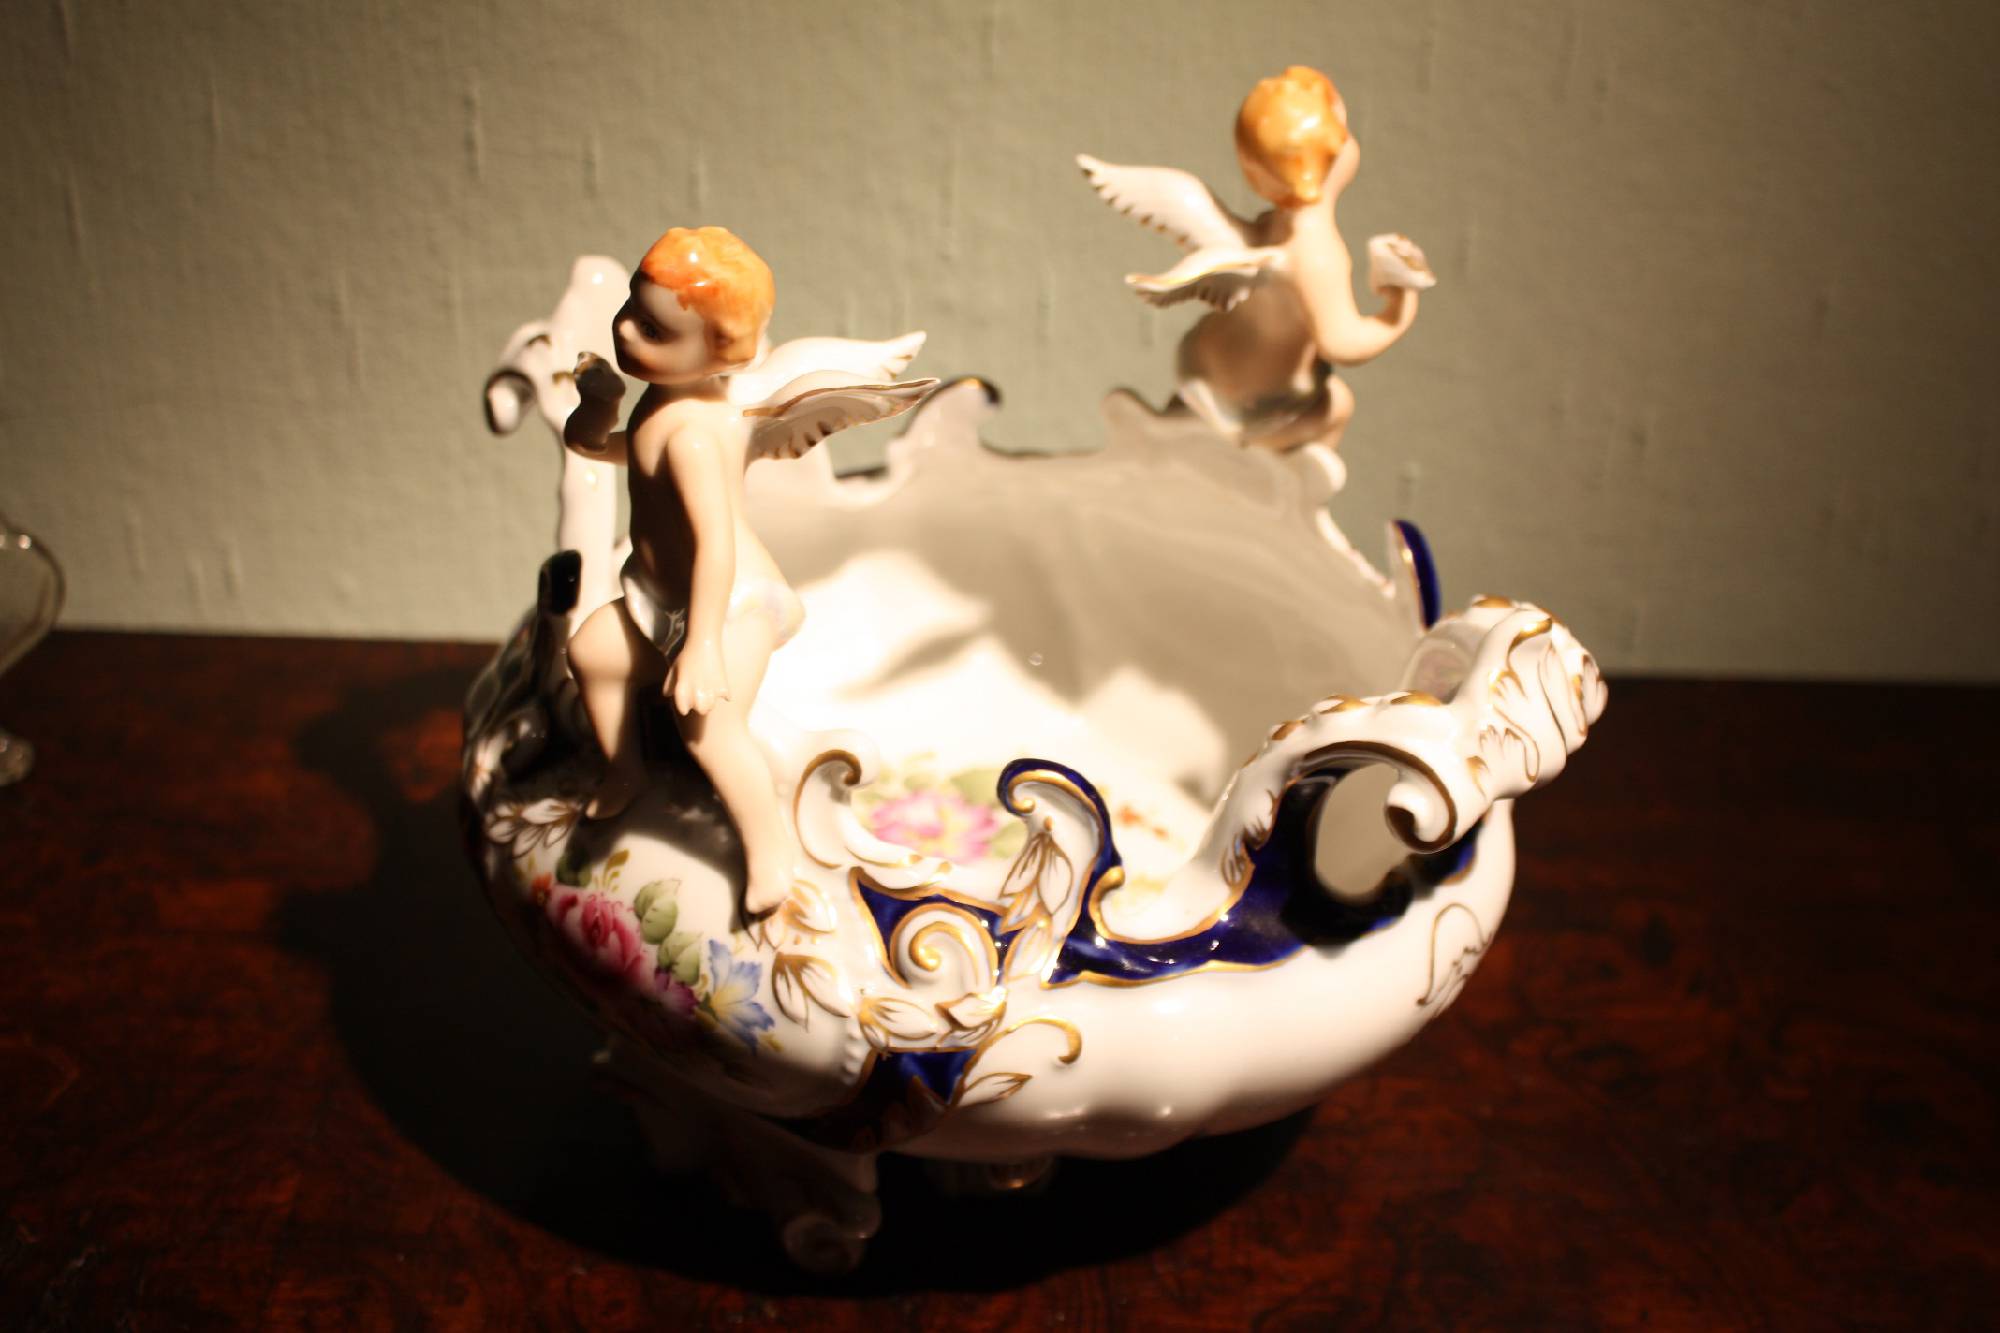 A vintage 20th century figurative putti angels rich ornate 2 handle porcelain dish tray by Kueps